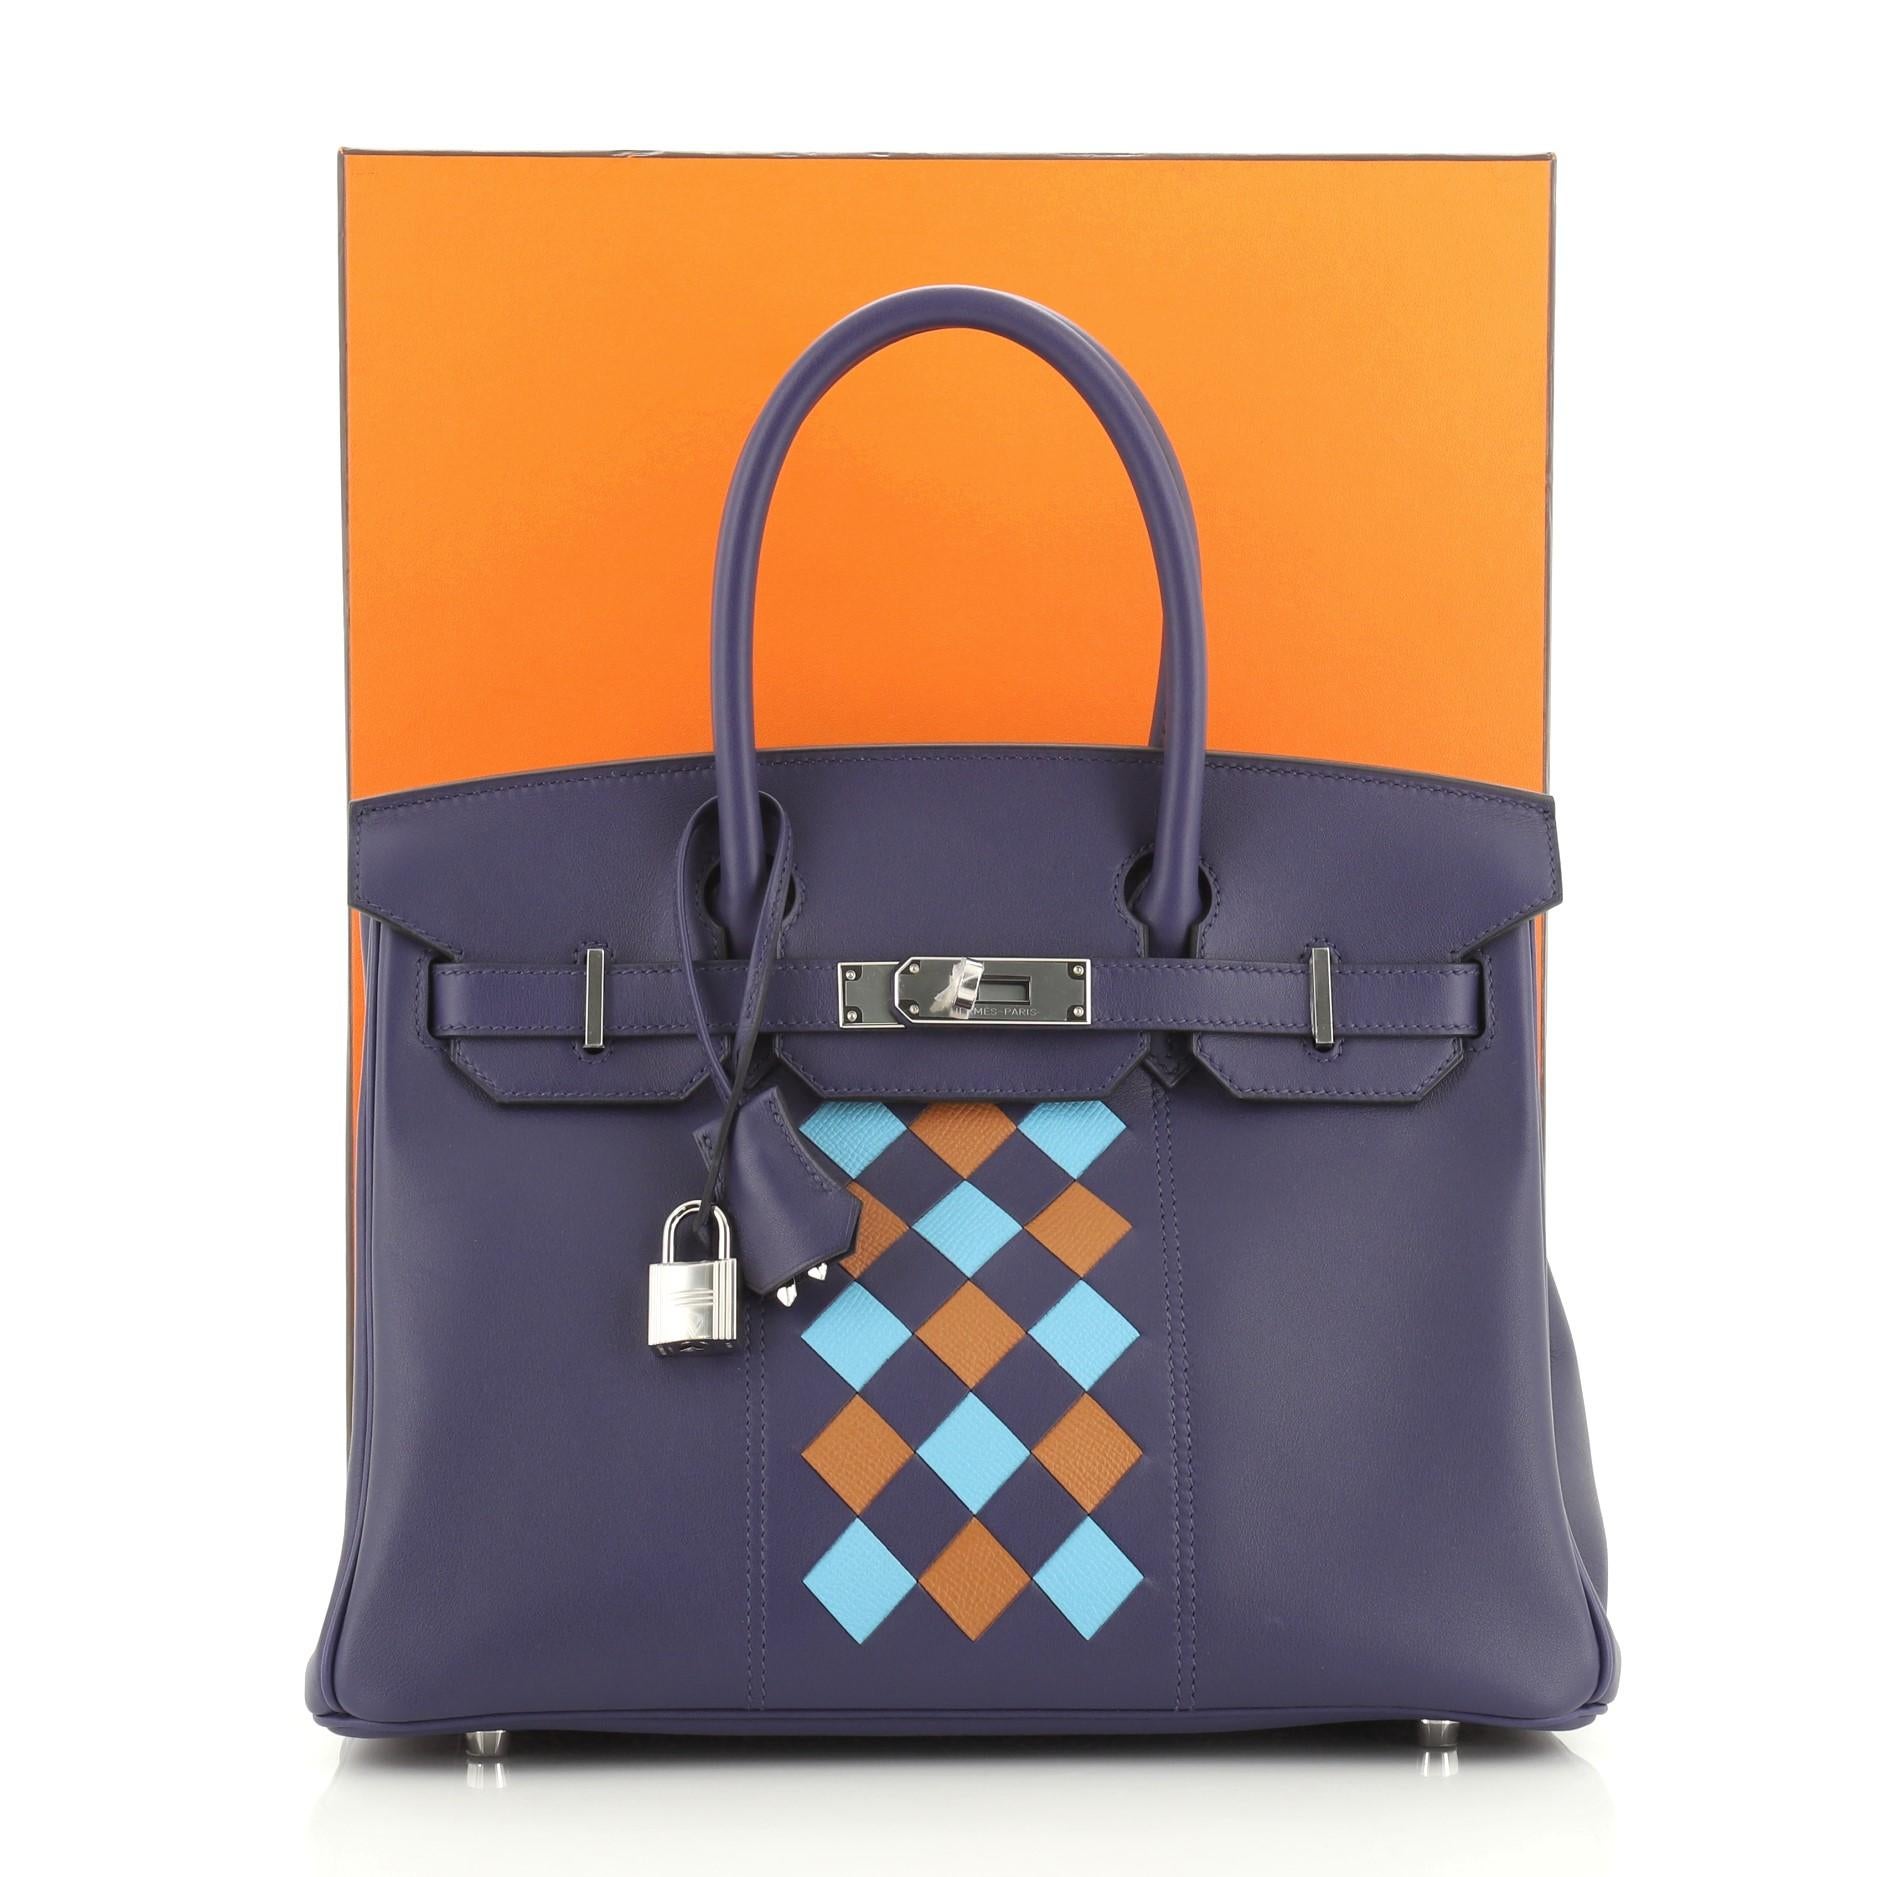 This Hermes Birkin Handbag Tressage Bleu Encre Swift and Palladium Hardware 30, crafted in Bleu Encre, Bleu du Nord, Gold Swift and Epsom leather, features dual rolled handles, front flap, and palladium-tone hardware. Its turn-lock closure opens to